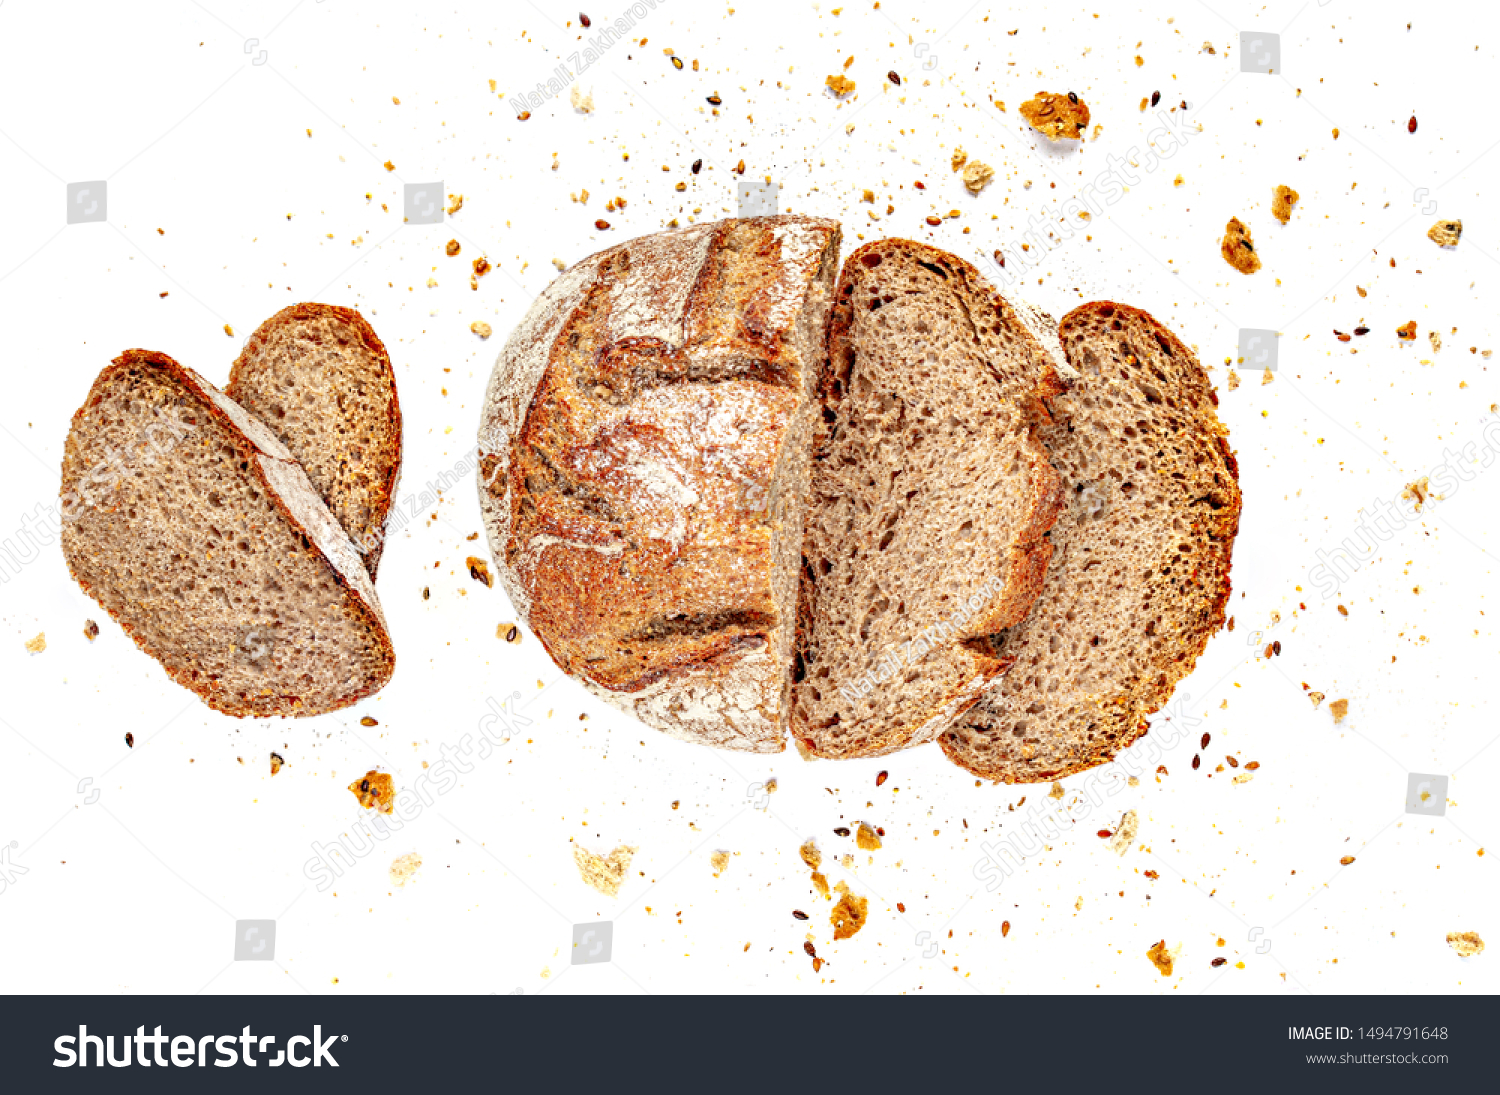 Sliced Multigrain bread isolated on a white background. Rye Bread  slices with crumbs. Top view. Close up #1494791648